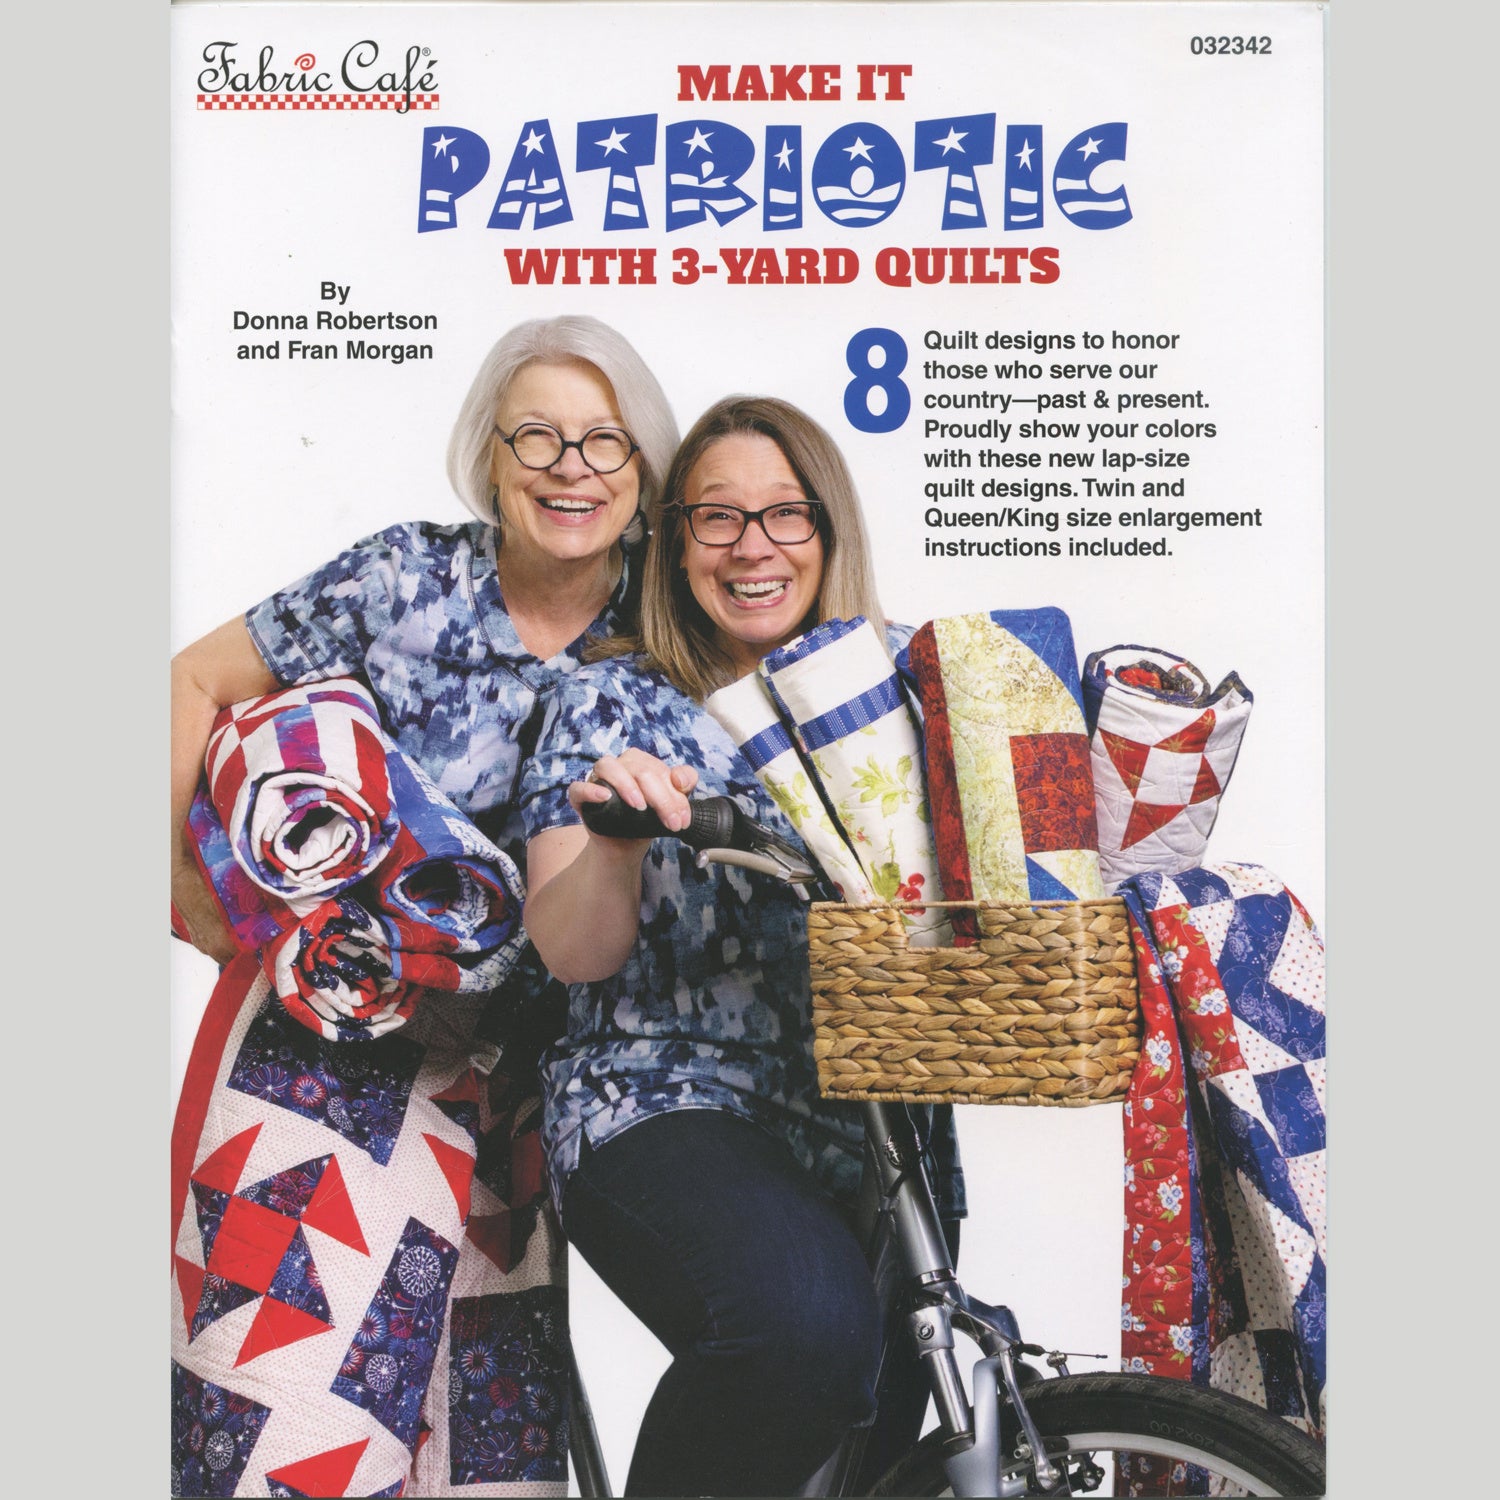 Quick'n Easy 3 Yard Quilts - Downloadable Pattern Book